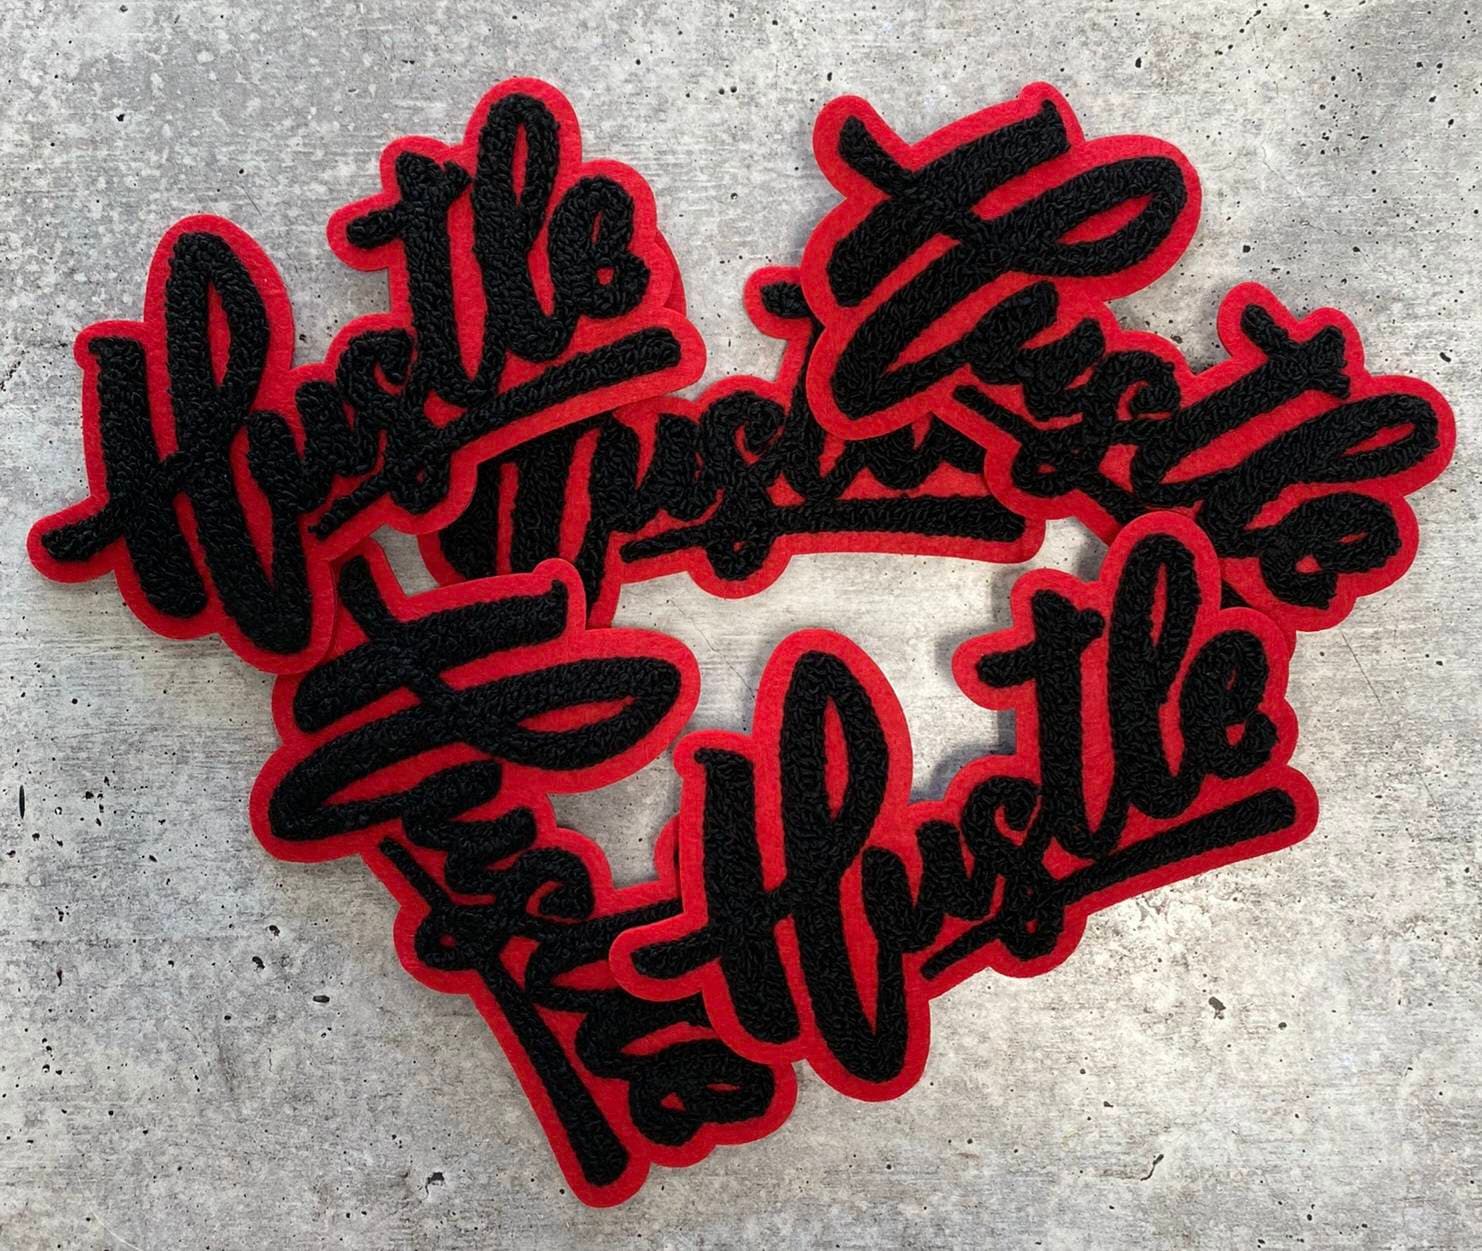 New SIZE, 1-pc Black & Red "Hustle" Chenille Patch (iron-on) Size 6"x4", Varsity Patch for Denim, Camos, Hoodies, Small Patch